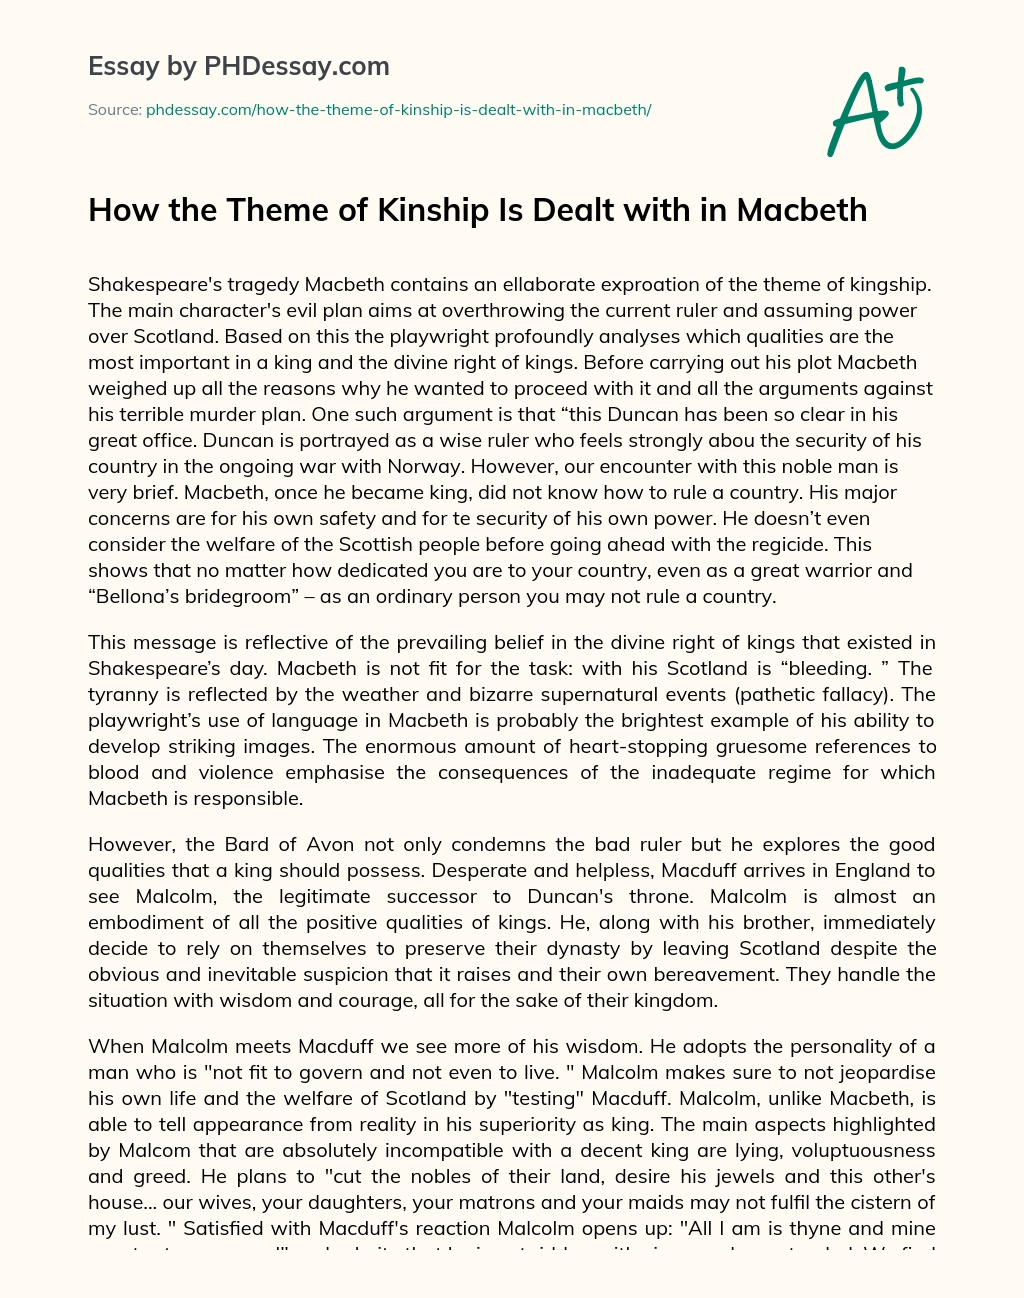 How the Theme of Kinship Is Dealt with in Macbeth essay